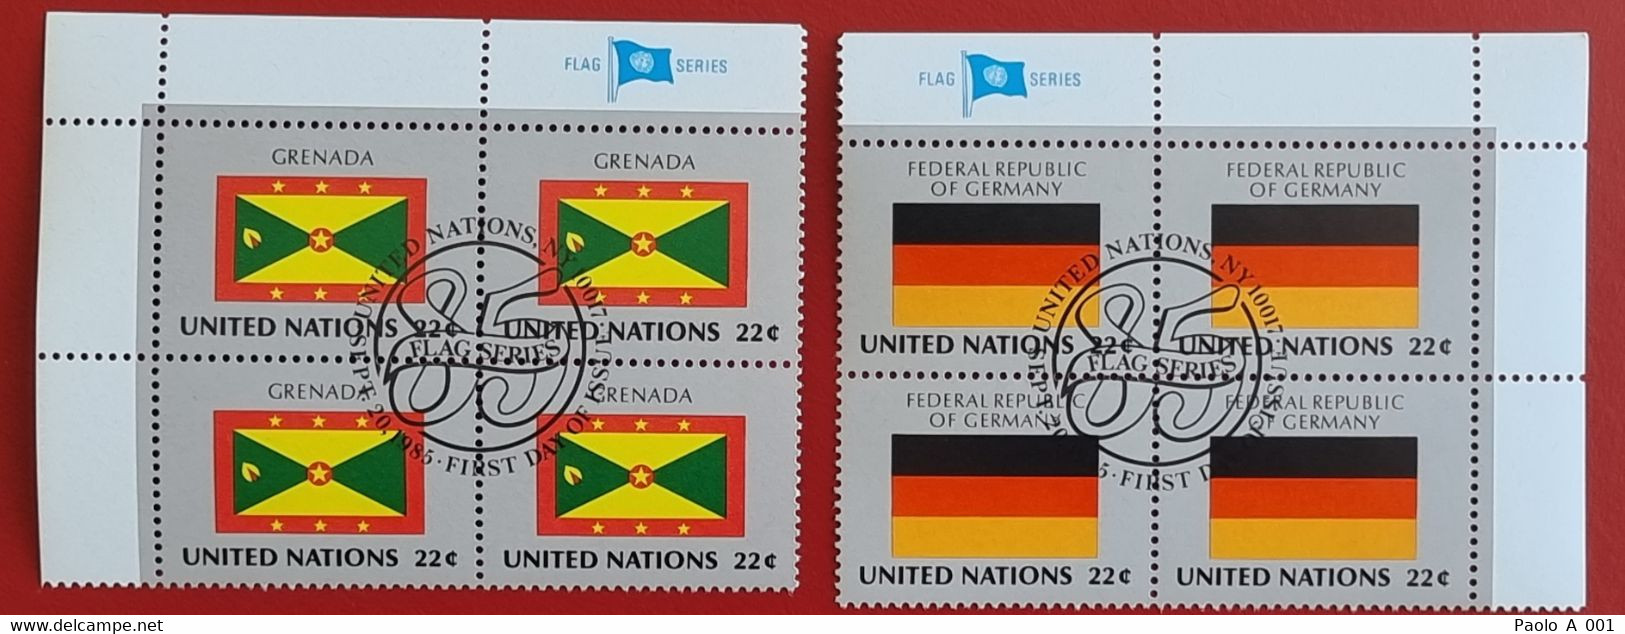 UNO NEW YORK 1985 DEUTSCHLAND GERMANY EUROPE GRENADA AMERICA FLAG OF NATIONS BLOC OF FOUR FIRST DAY FULL GUM - Used Stamps